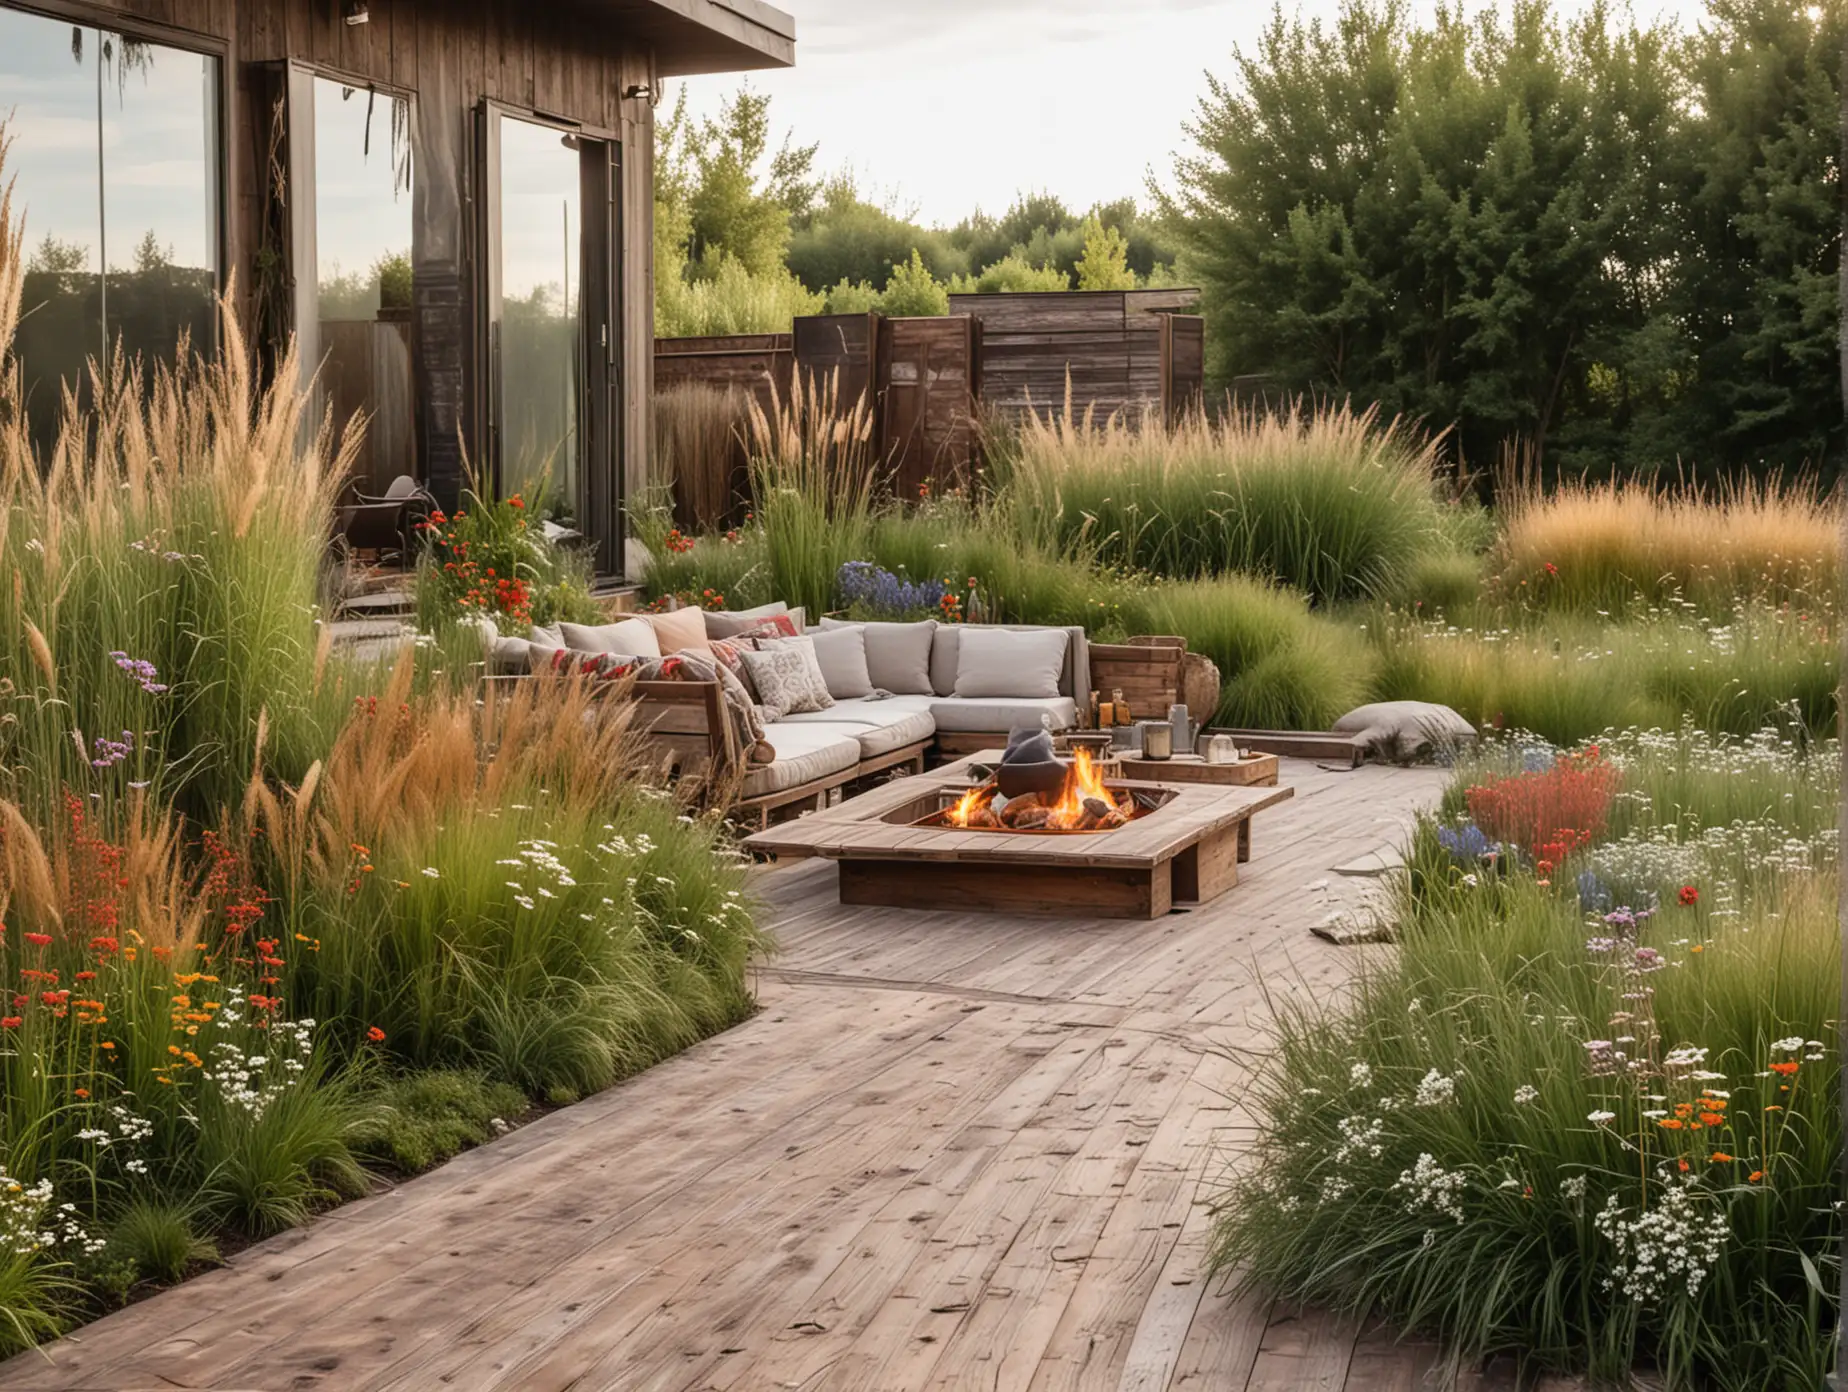 Rustic-Patio-Scene-with-Open-Fire-Pit-and-Container-House